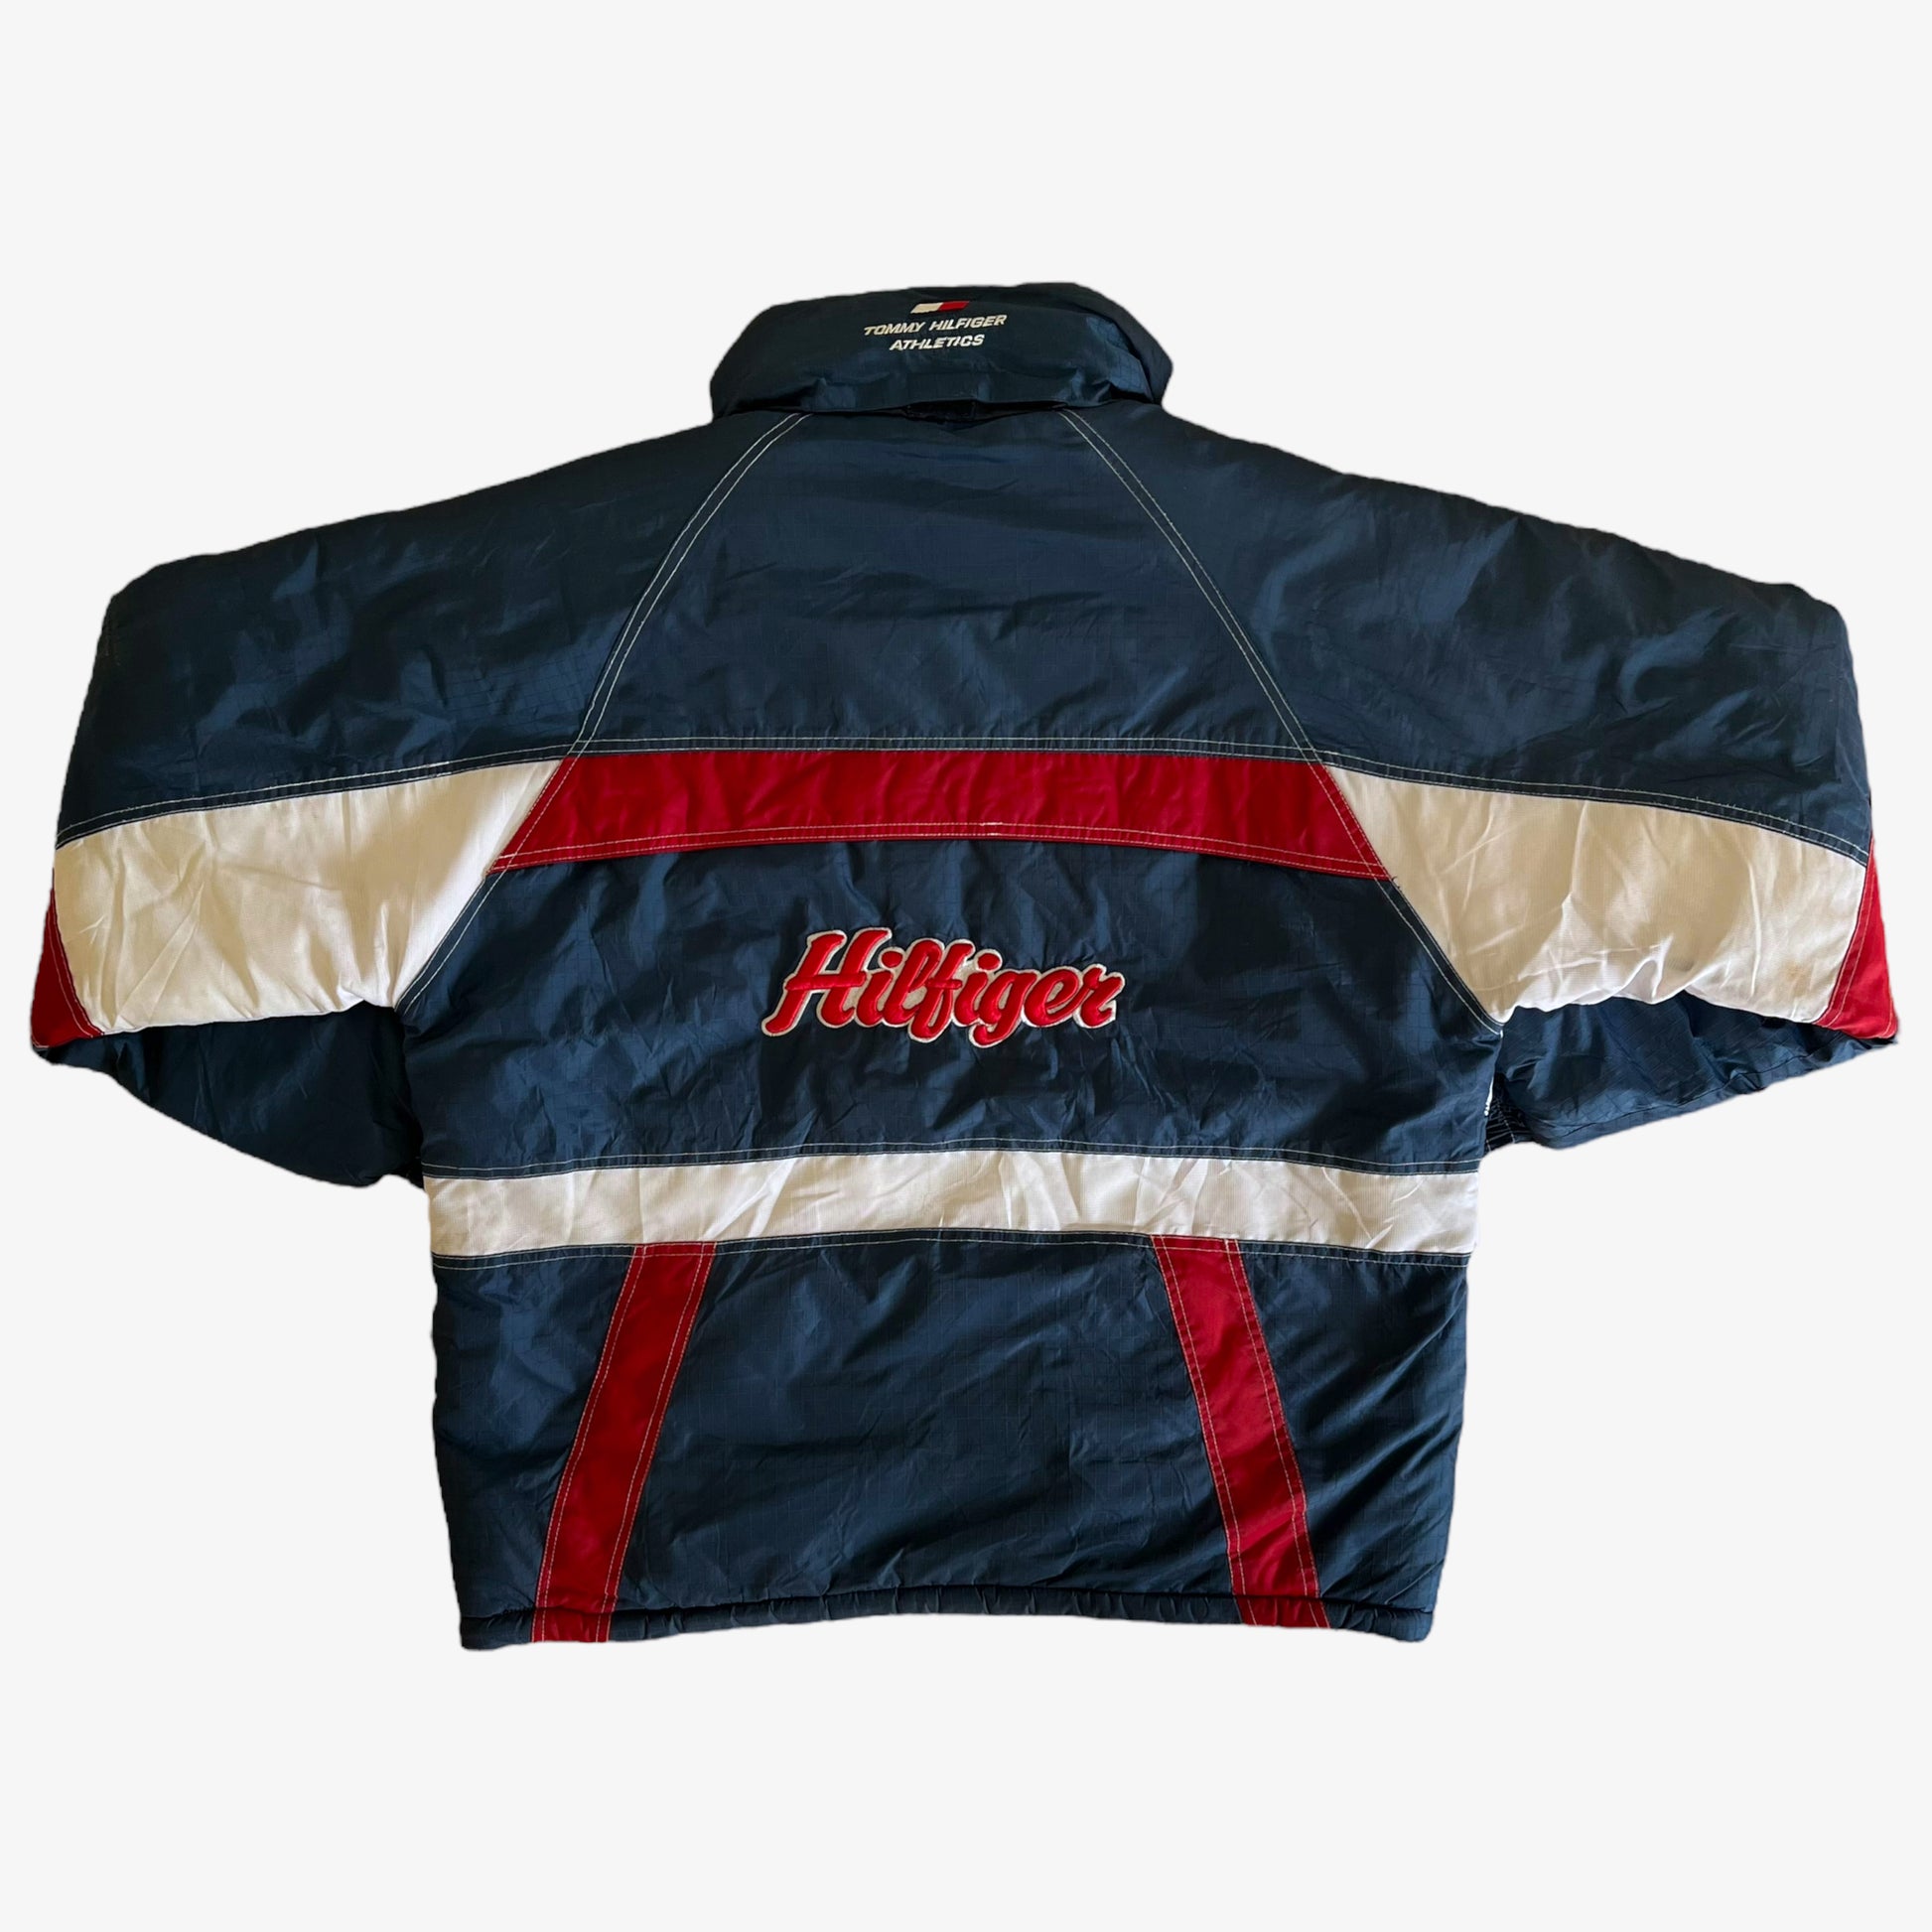 Vintage 90s Tommy Hilfiger Athletics Reversible Spell Out Puffer Jacket Back - Casspios Dream